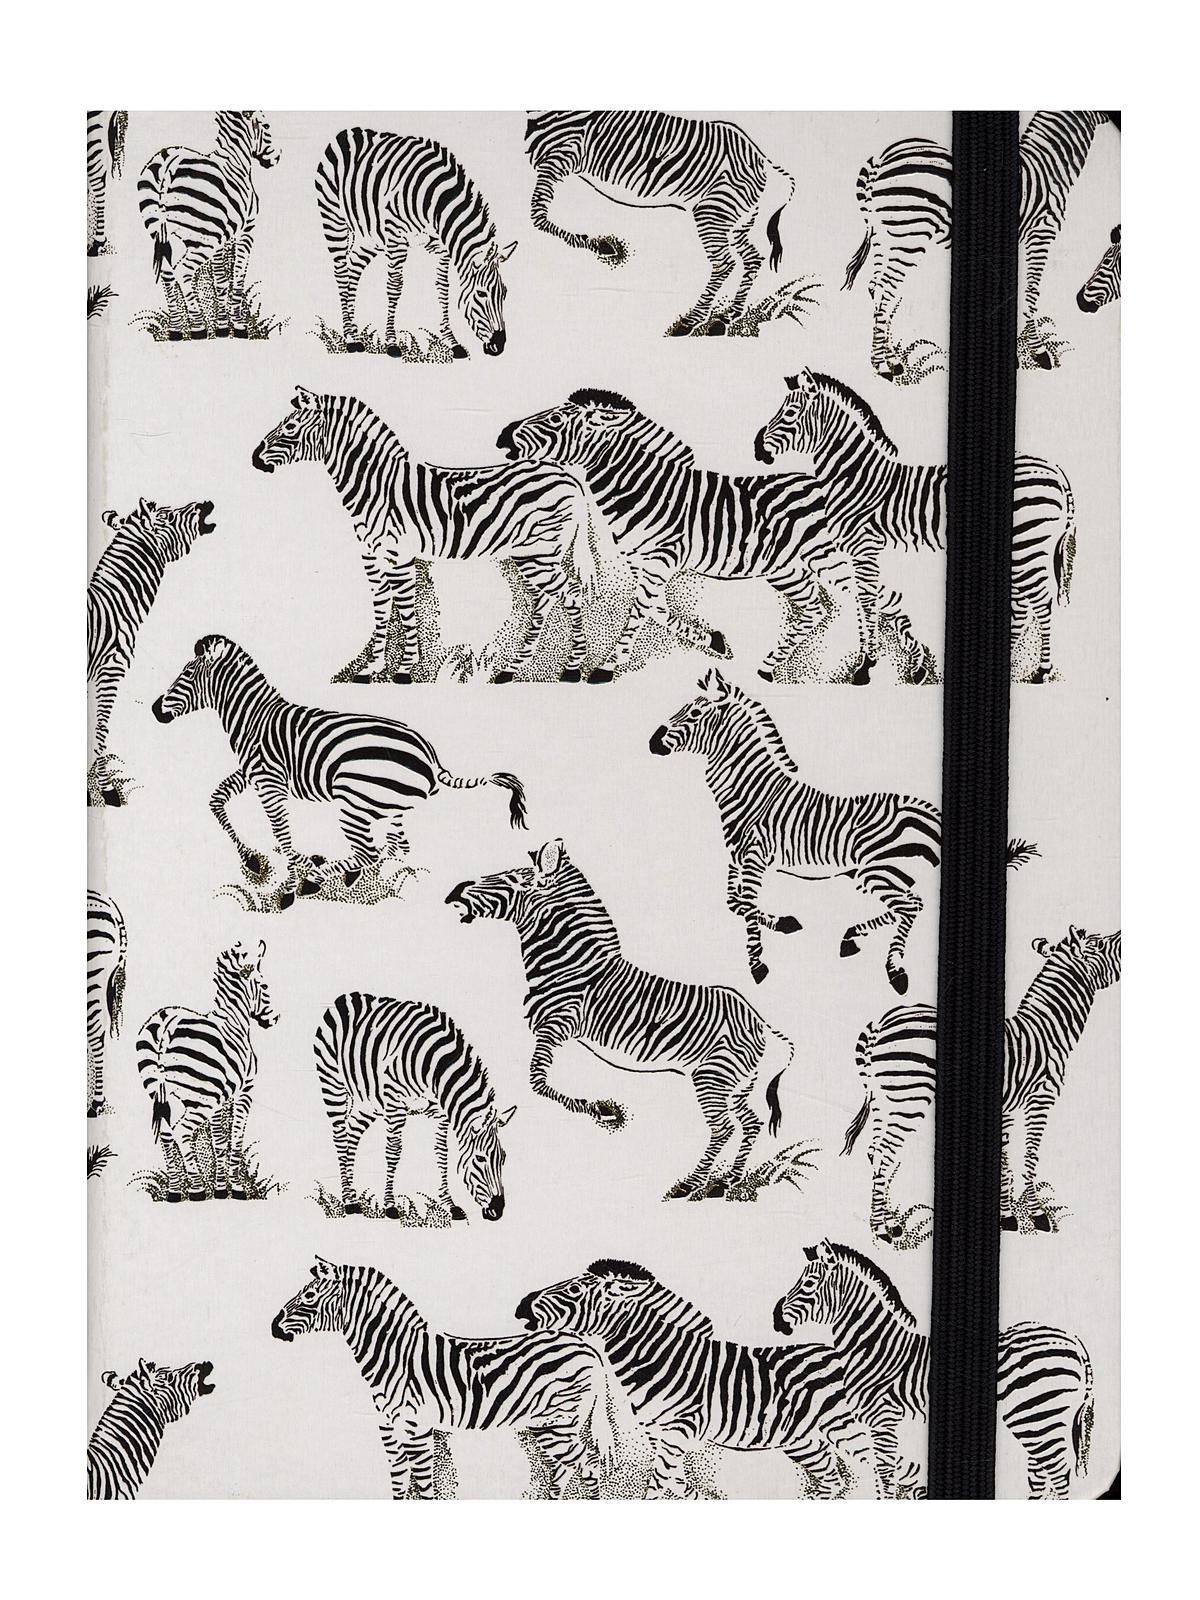 Mid-size Journals Zebra 6 1 4 In. X 8 1 4 In. 160 Pages, Lined